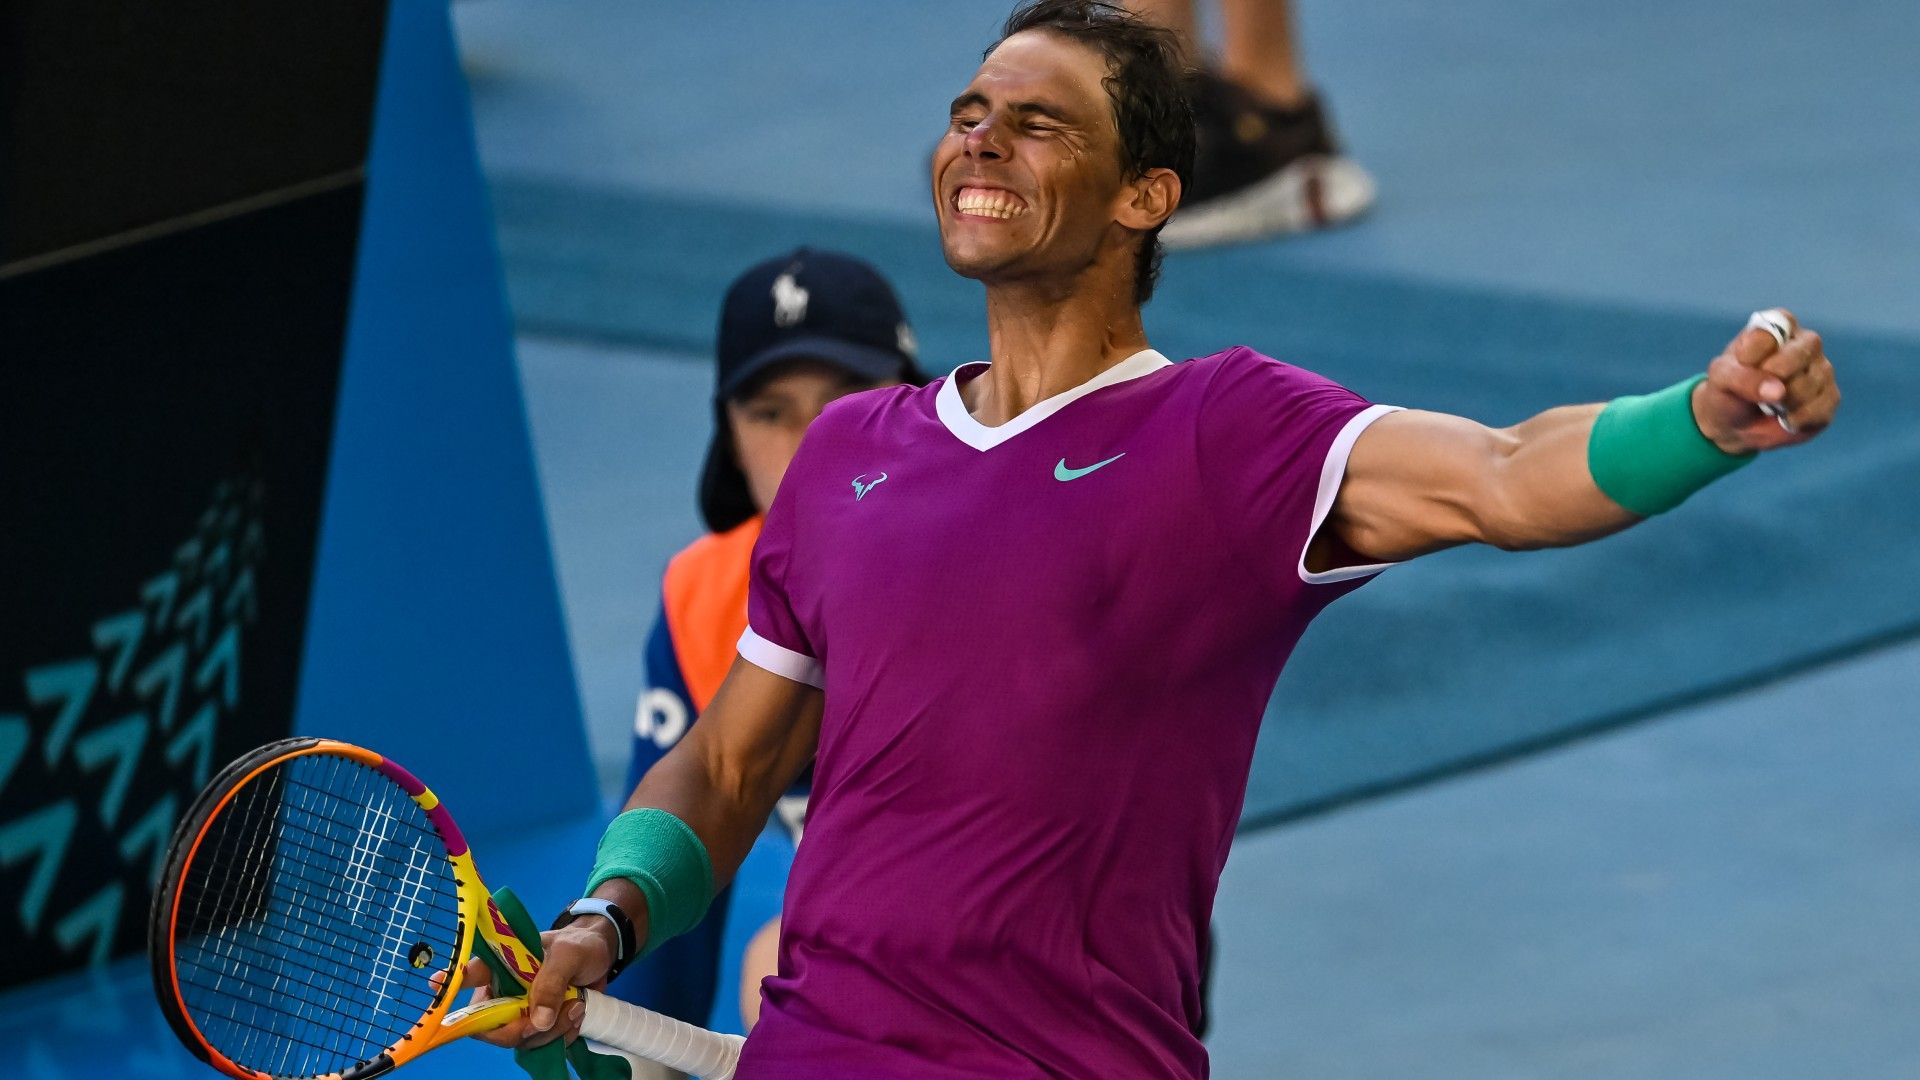 EXCLUSIVE: Why Rafael Nadal could be primed to surge to the top of the GOAT discussion